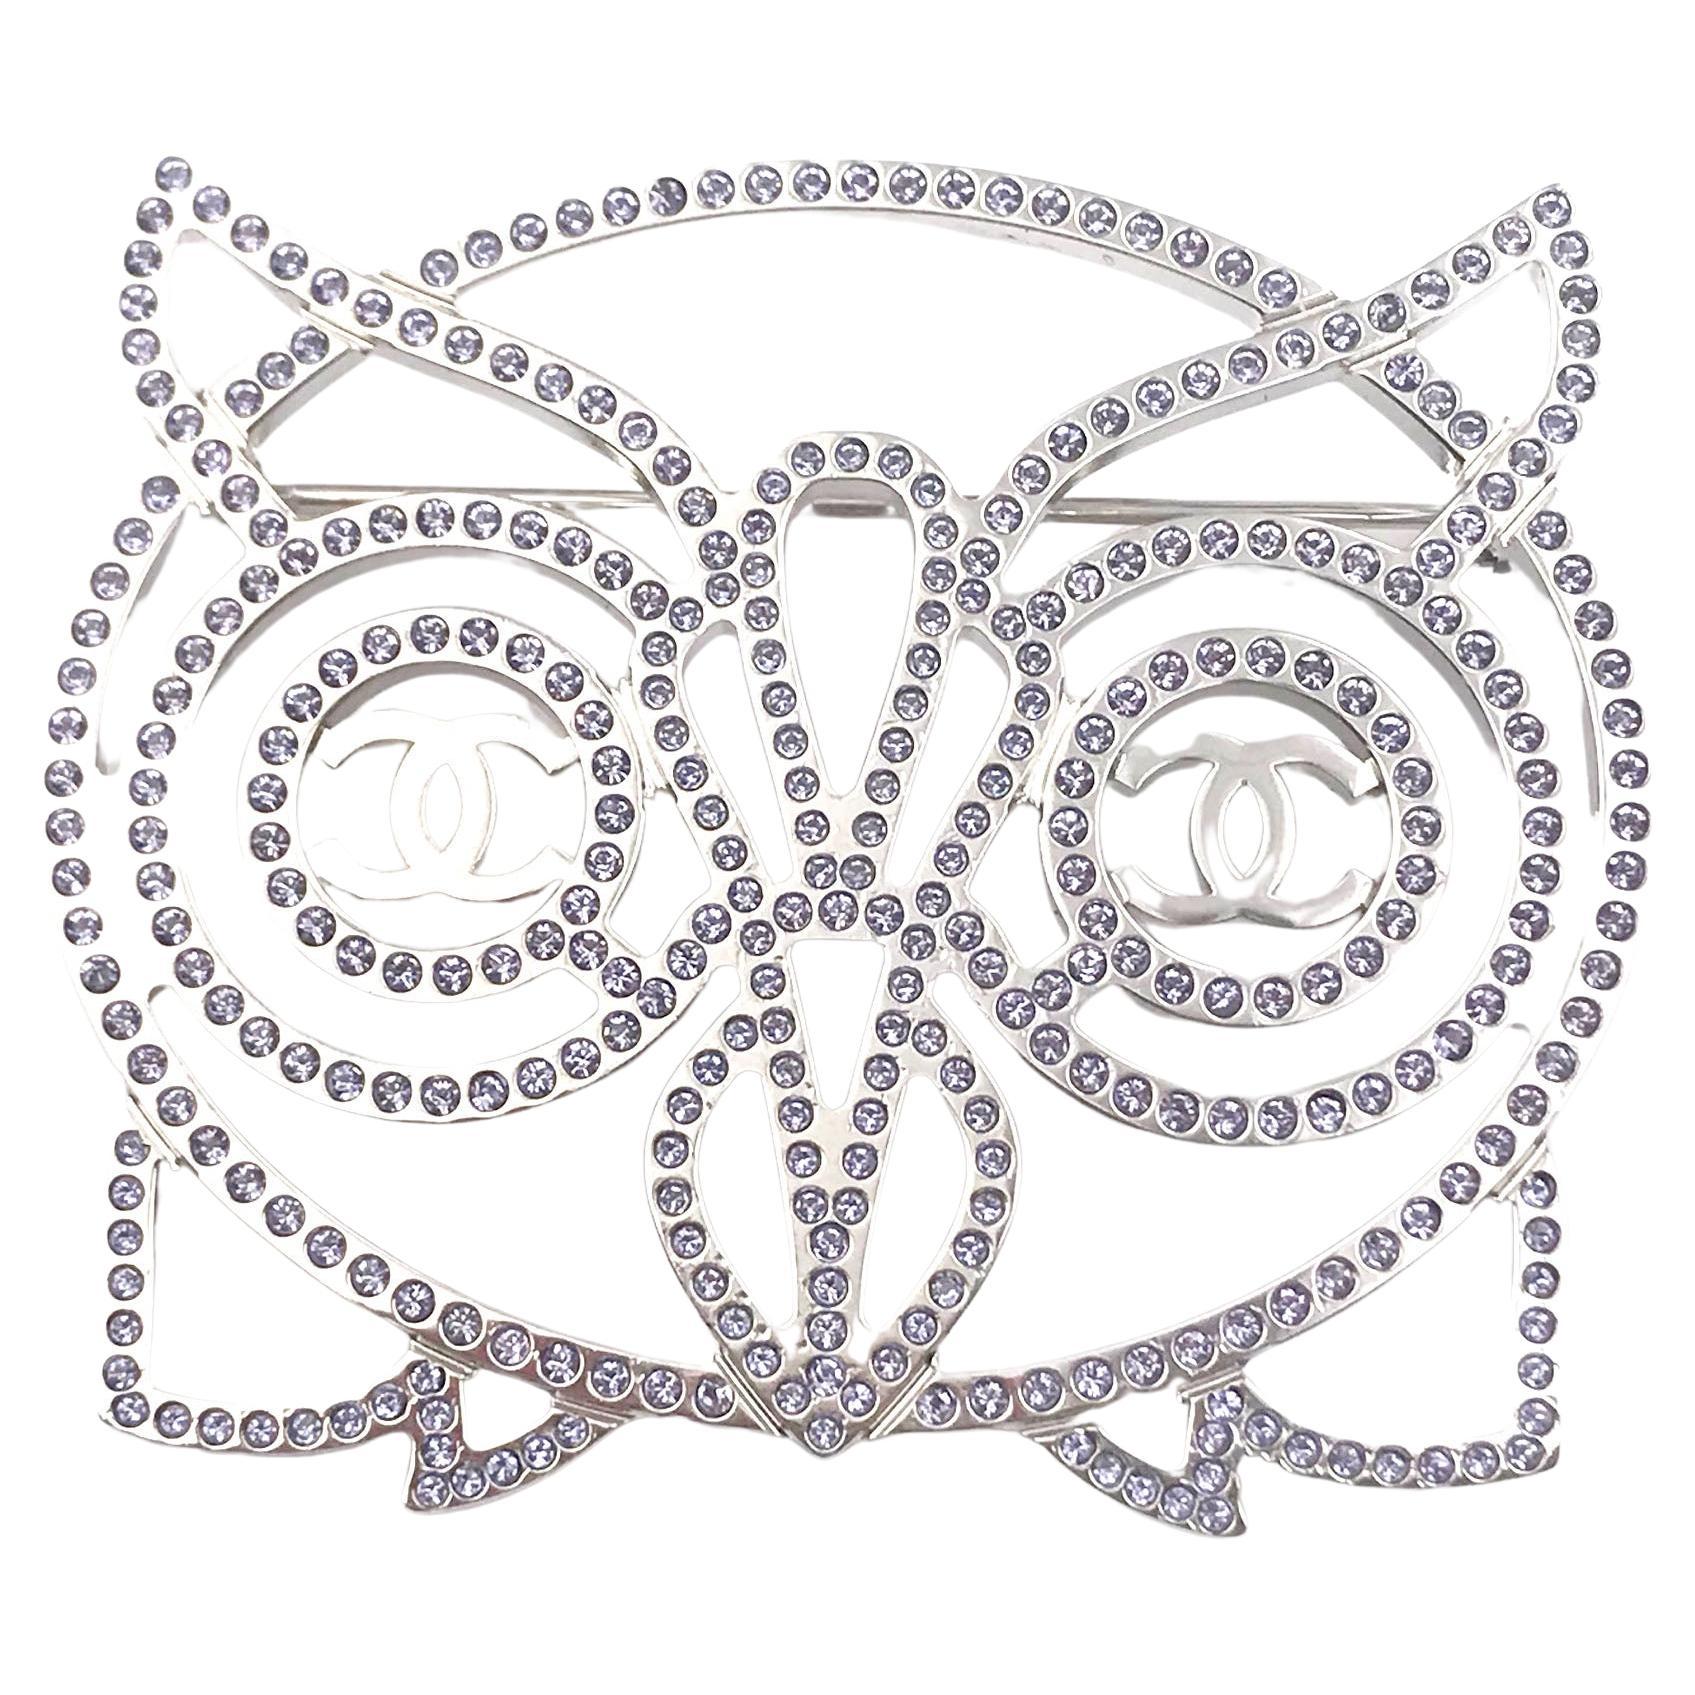 Chanel Brand New Silver Owl Light Lavender Crystal Brooch For Sale